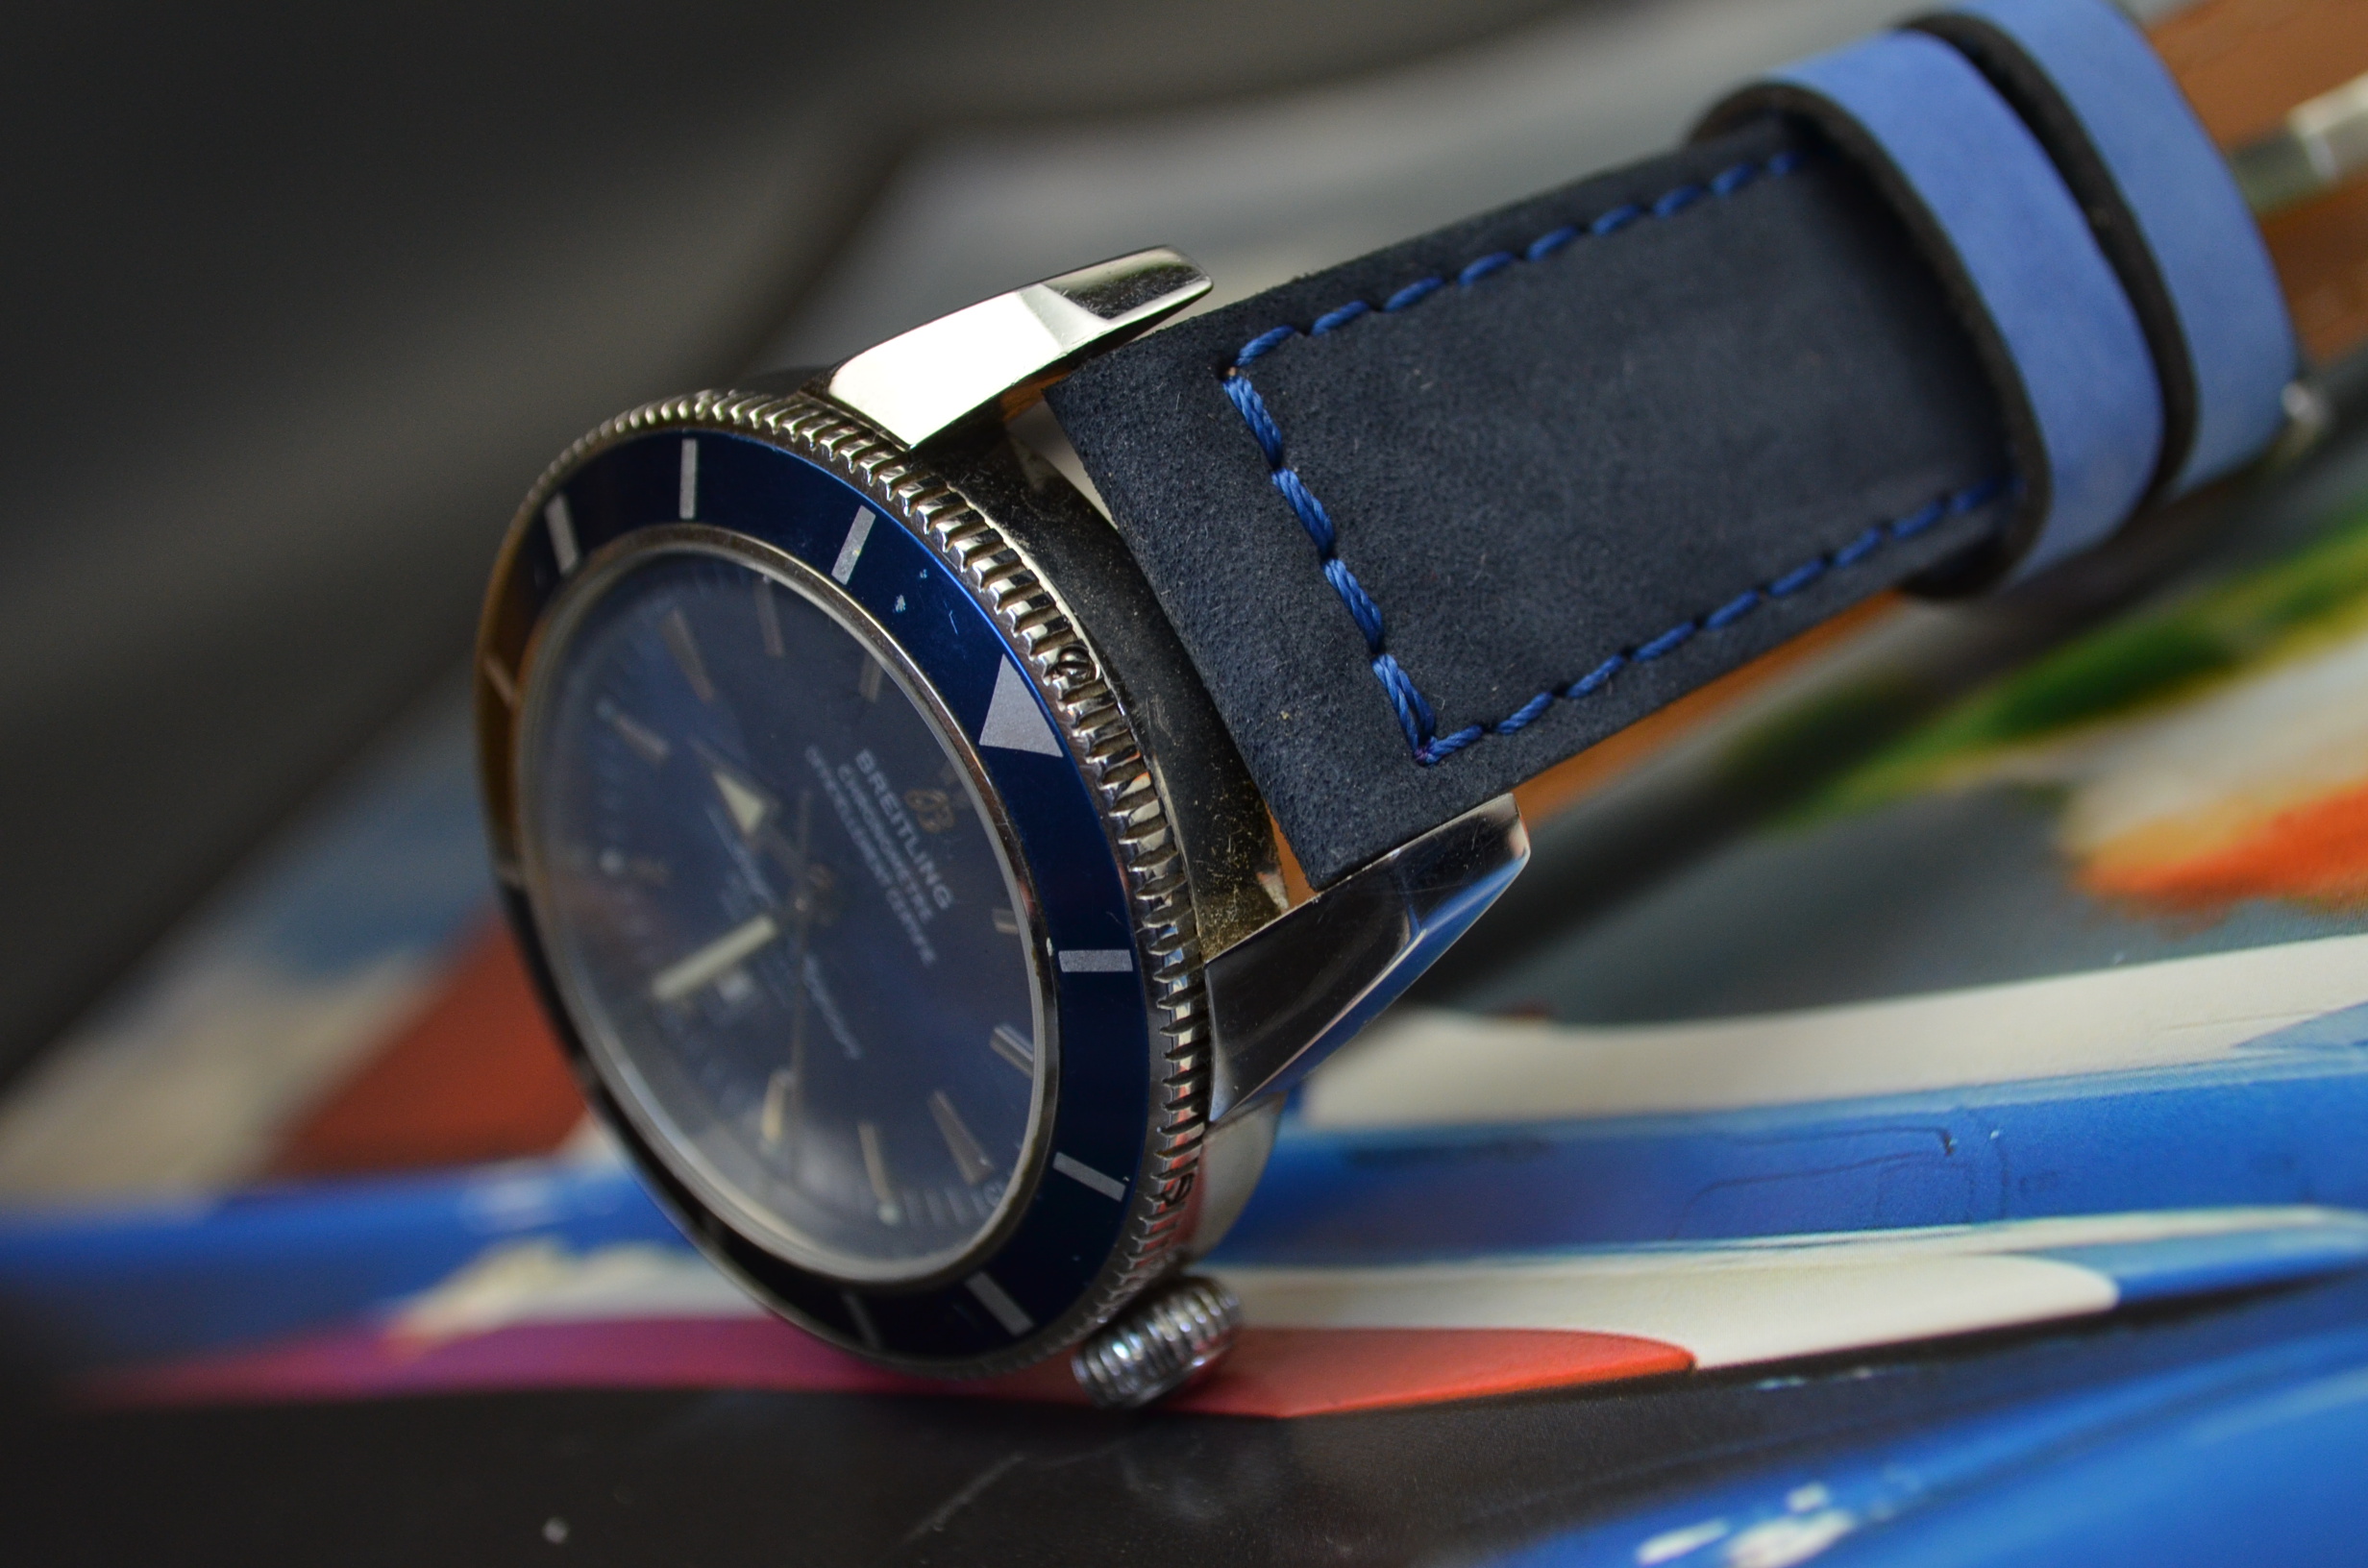 BLUE NAVY BLUE is one of our hand crafted watch straps. Available in blue navy blue color, 3.5 - 4 mm thick.